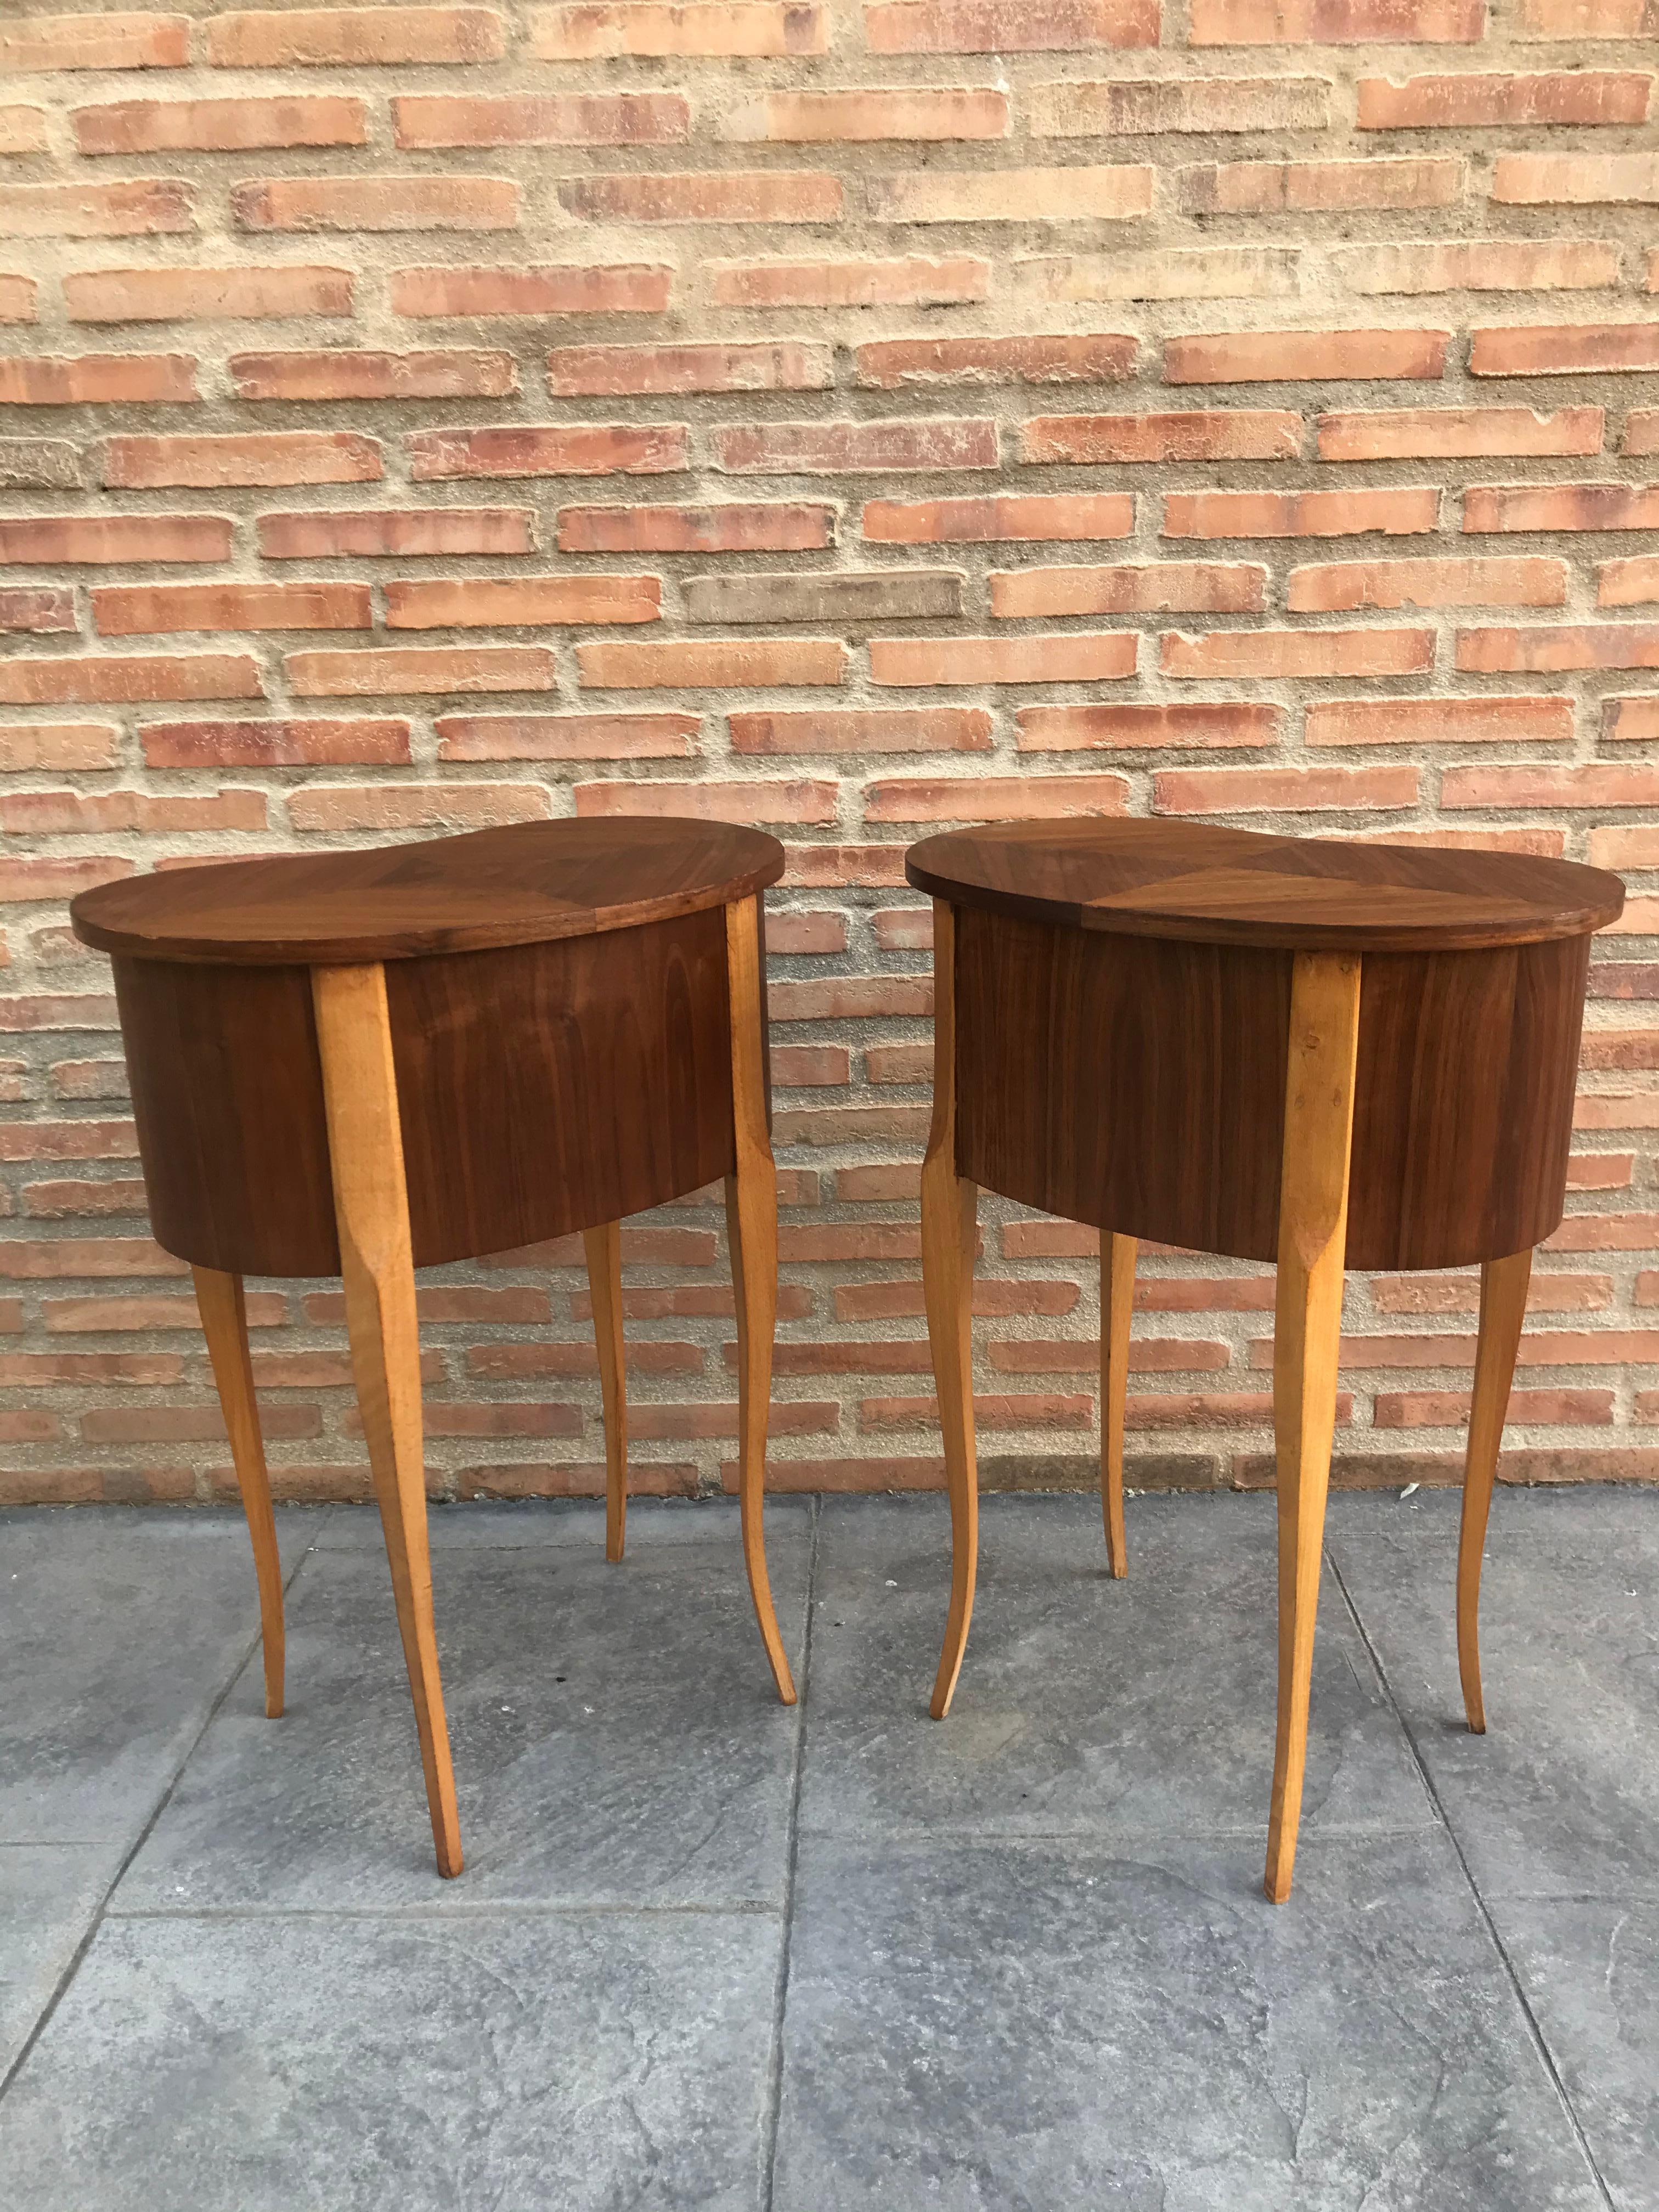 20th century pair of walnut nightstands with kidney shape and two drawers.